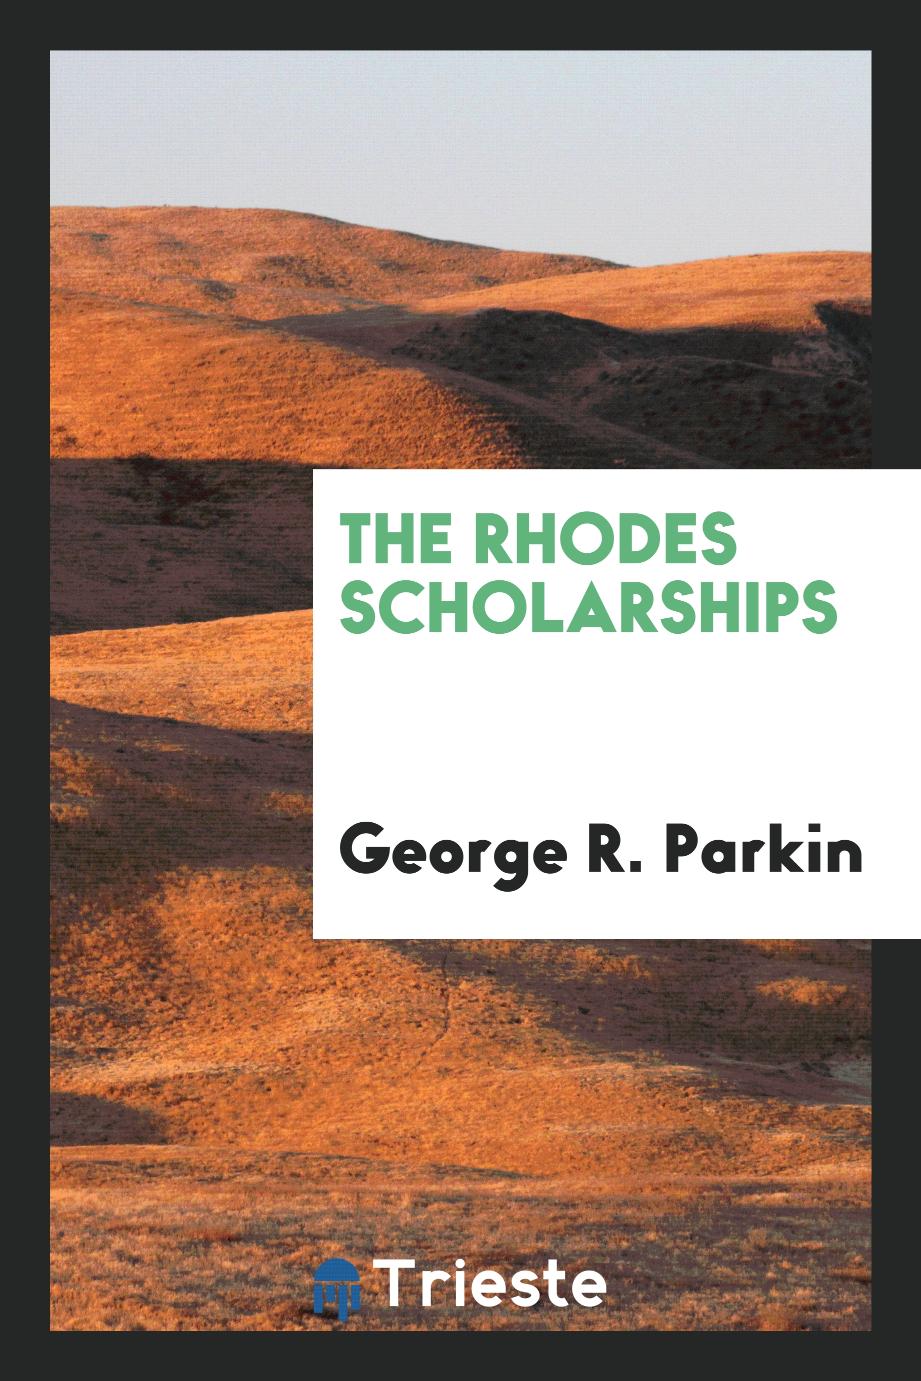 The Rhodes scholarships